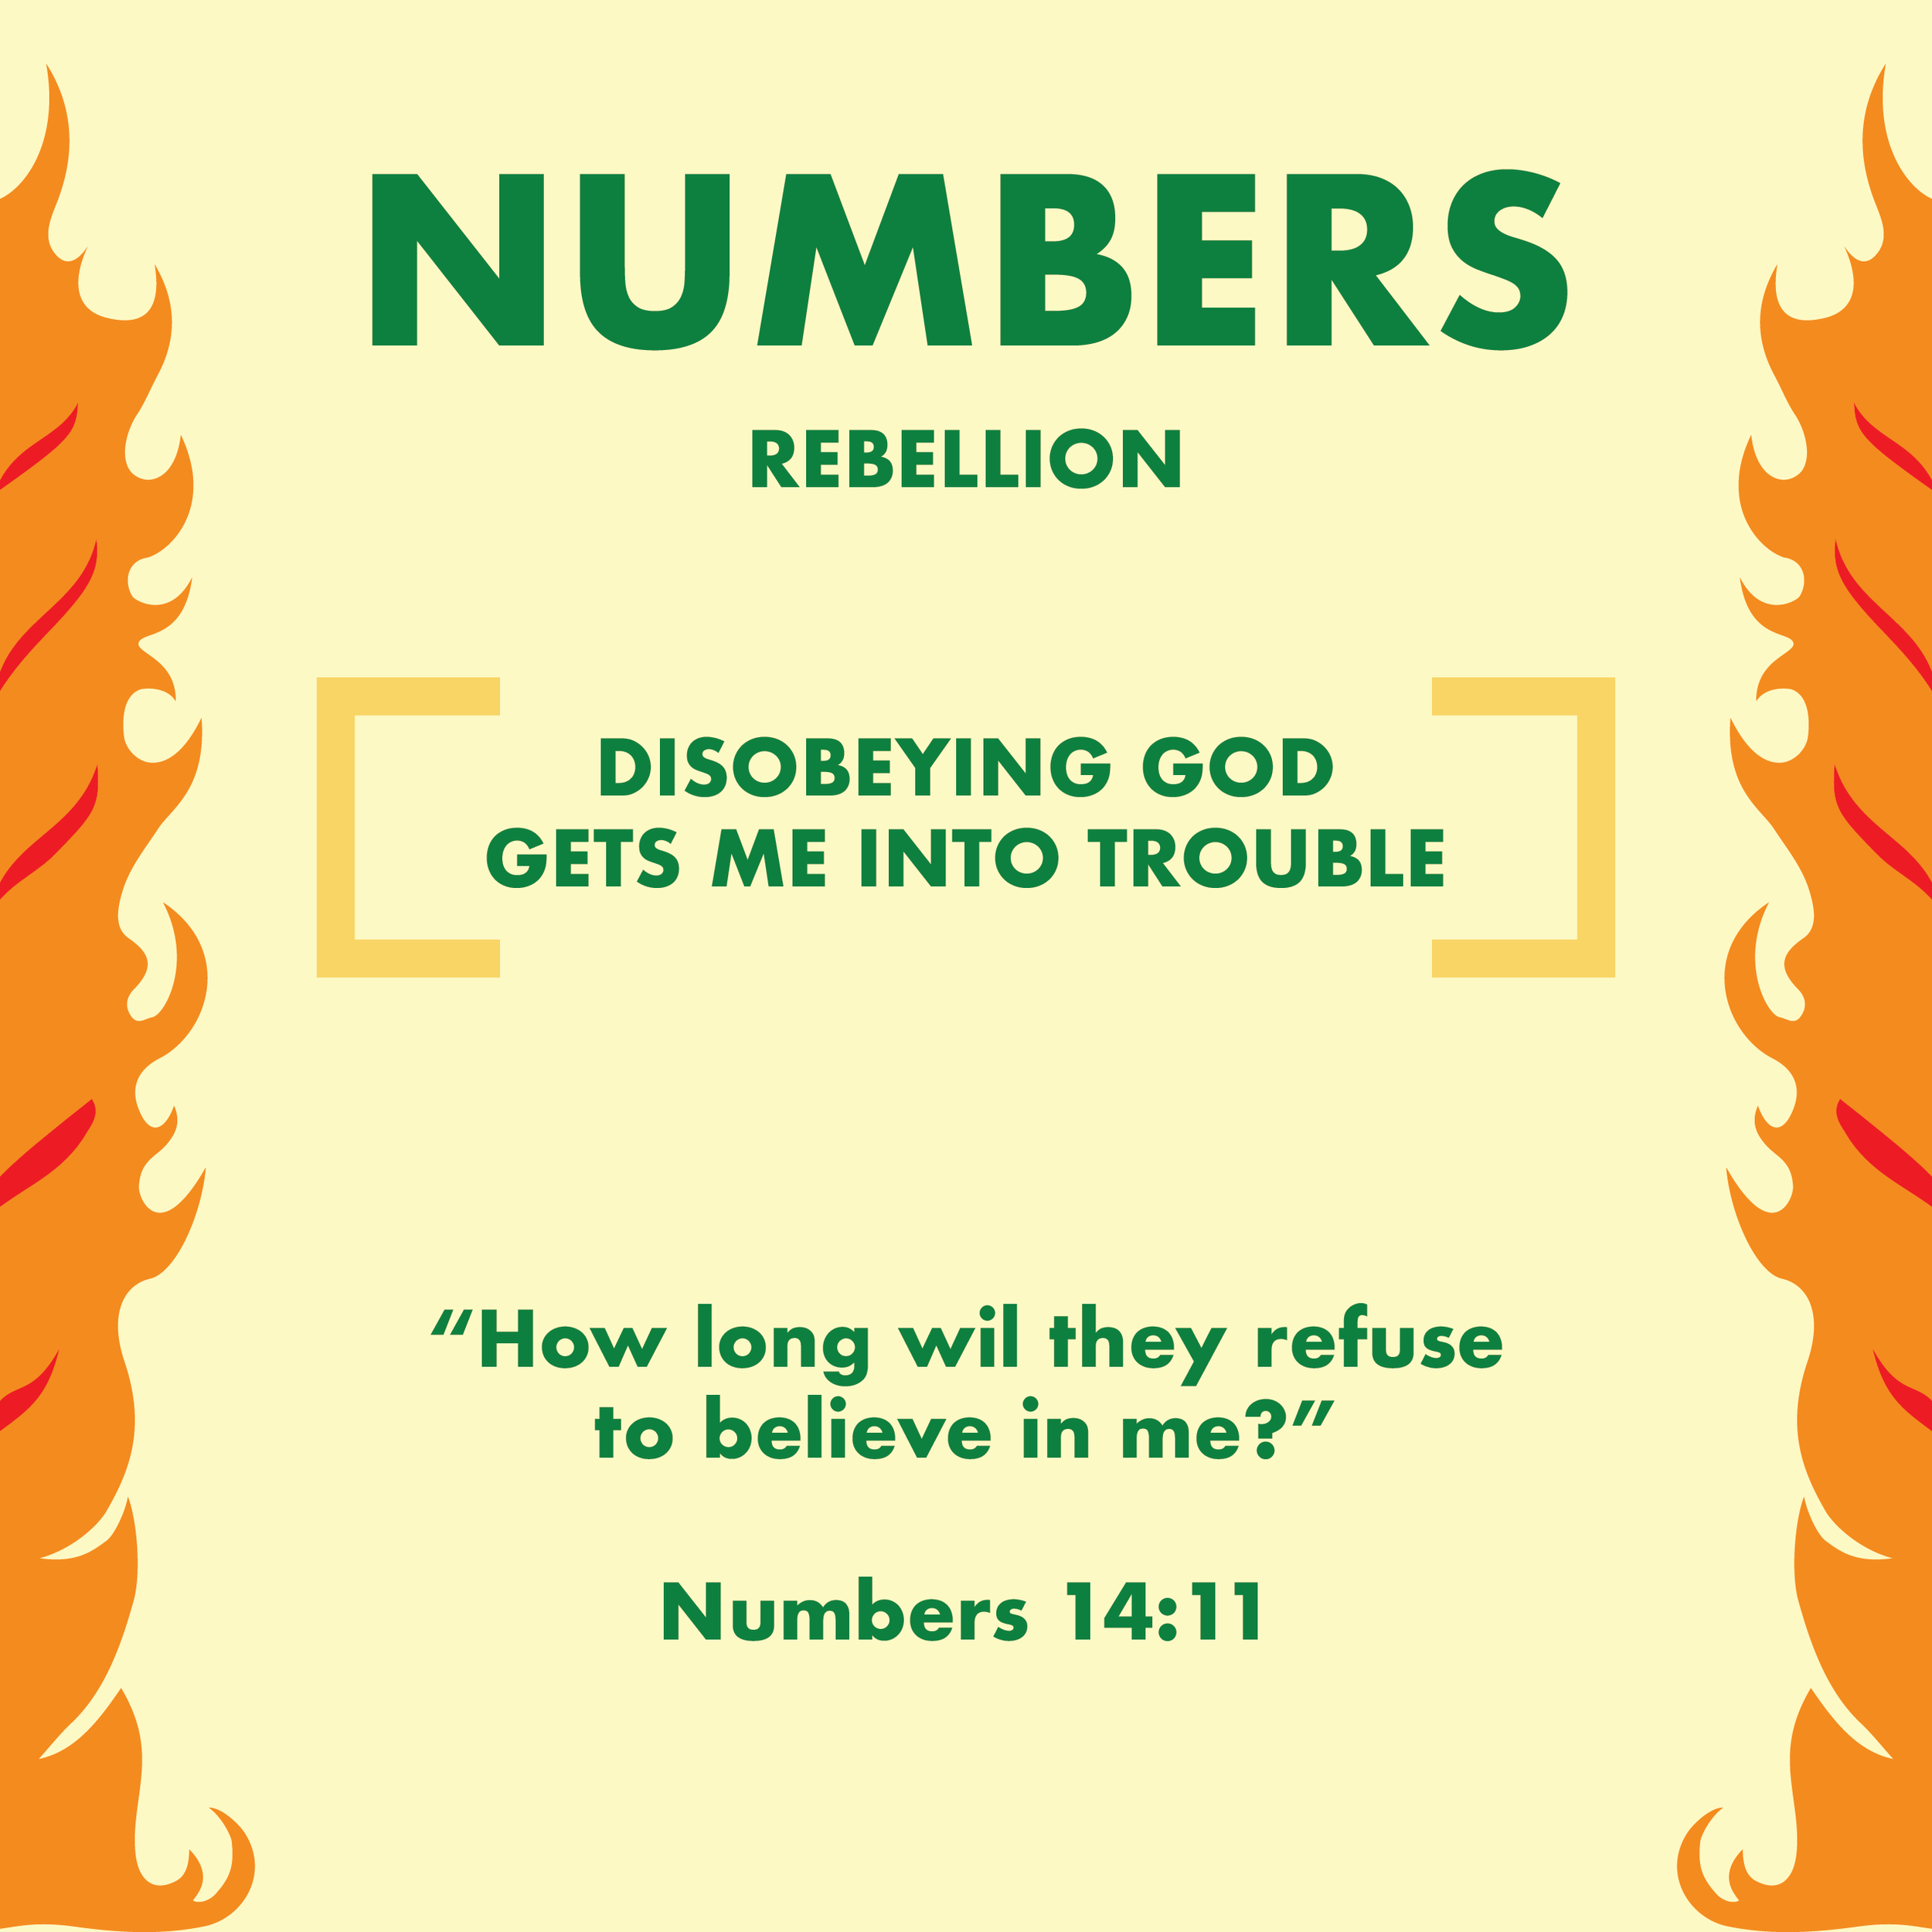 Books of the Bible_posters_04 Numbers.png